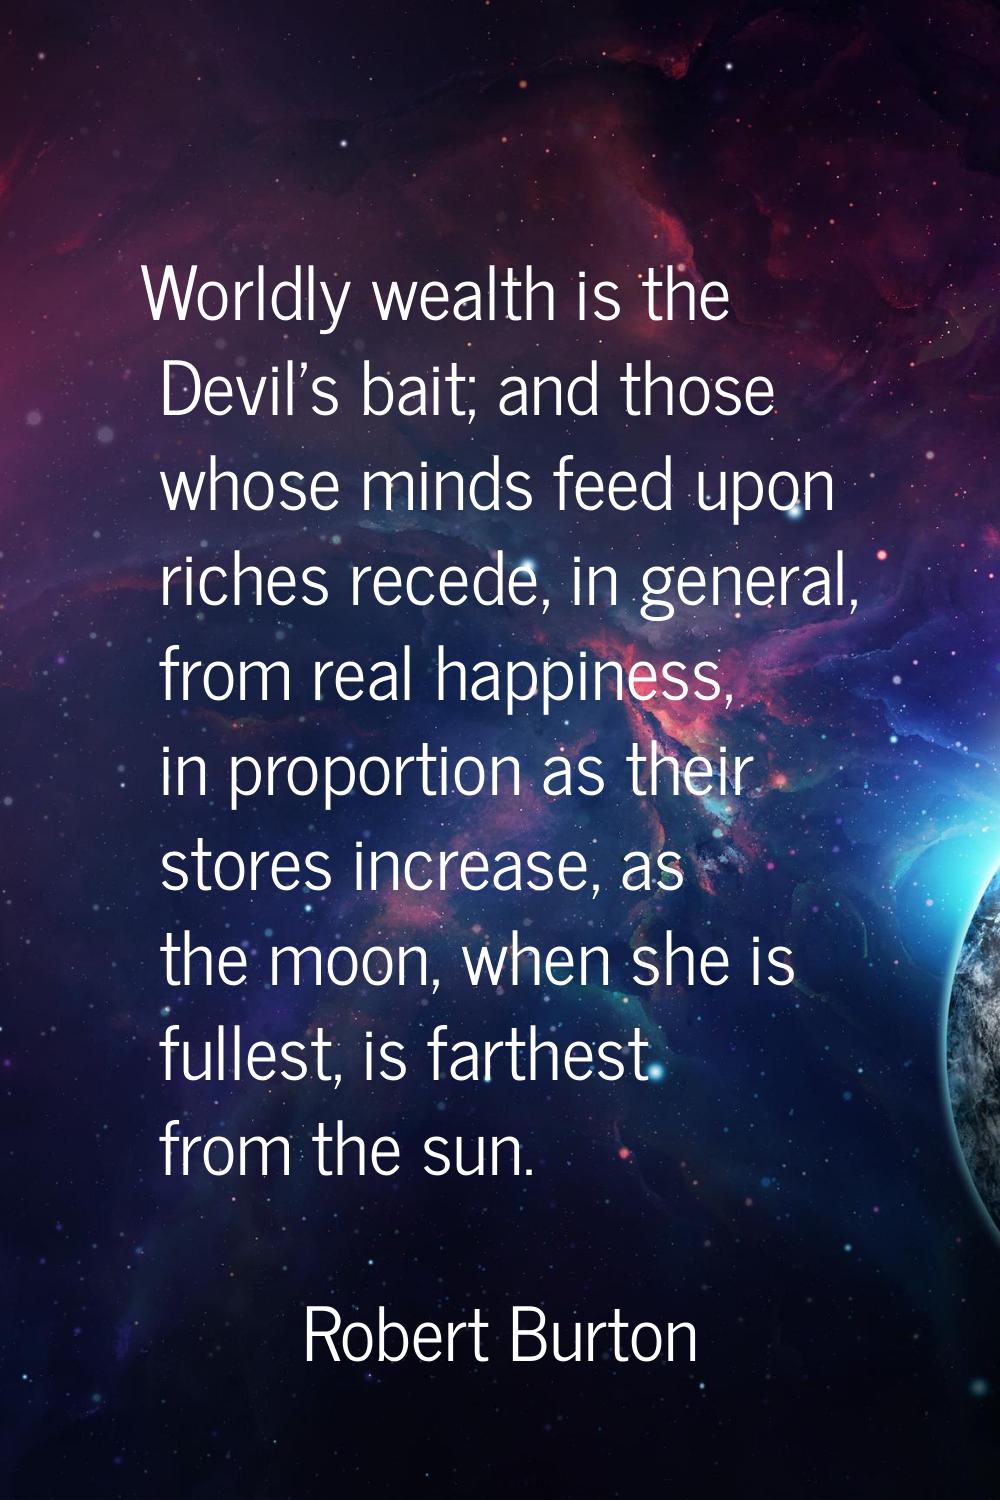 Worldly wealth is the Devil's bait; and those whose minds feed upon riches recede, in general, from